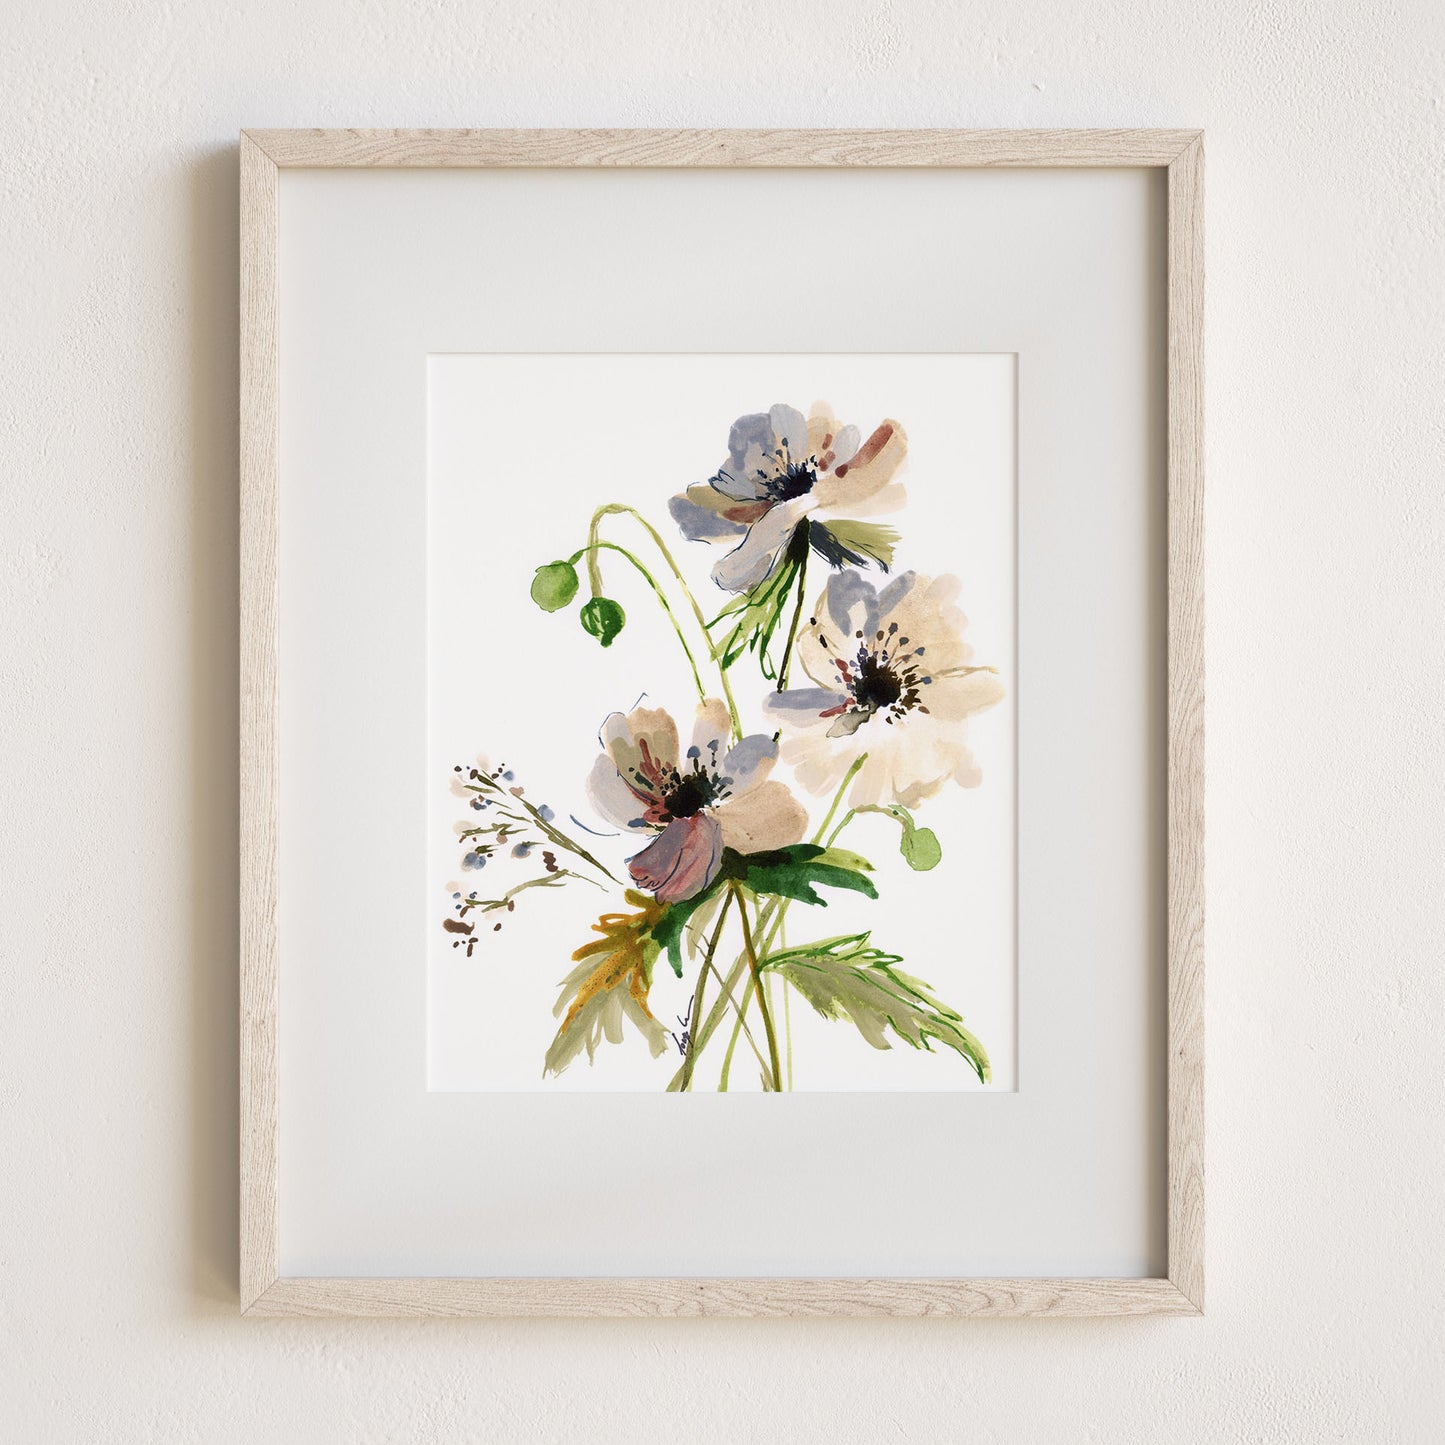 New Beginnings Art Print, 8x10" with mat and frame